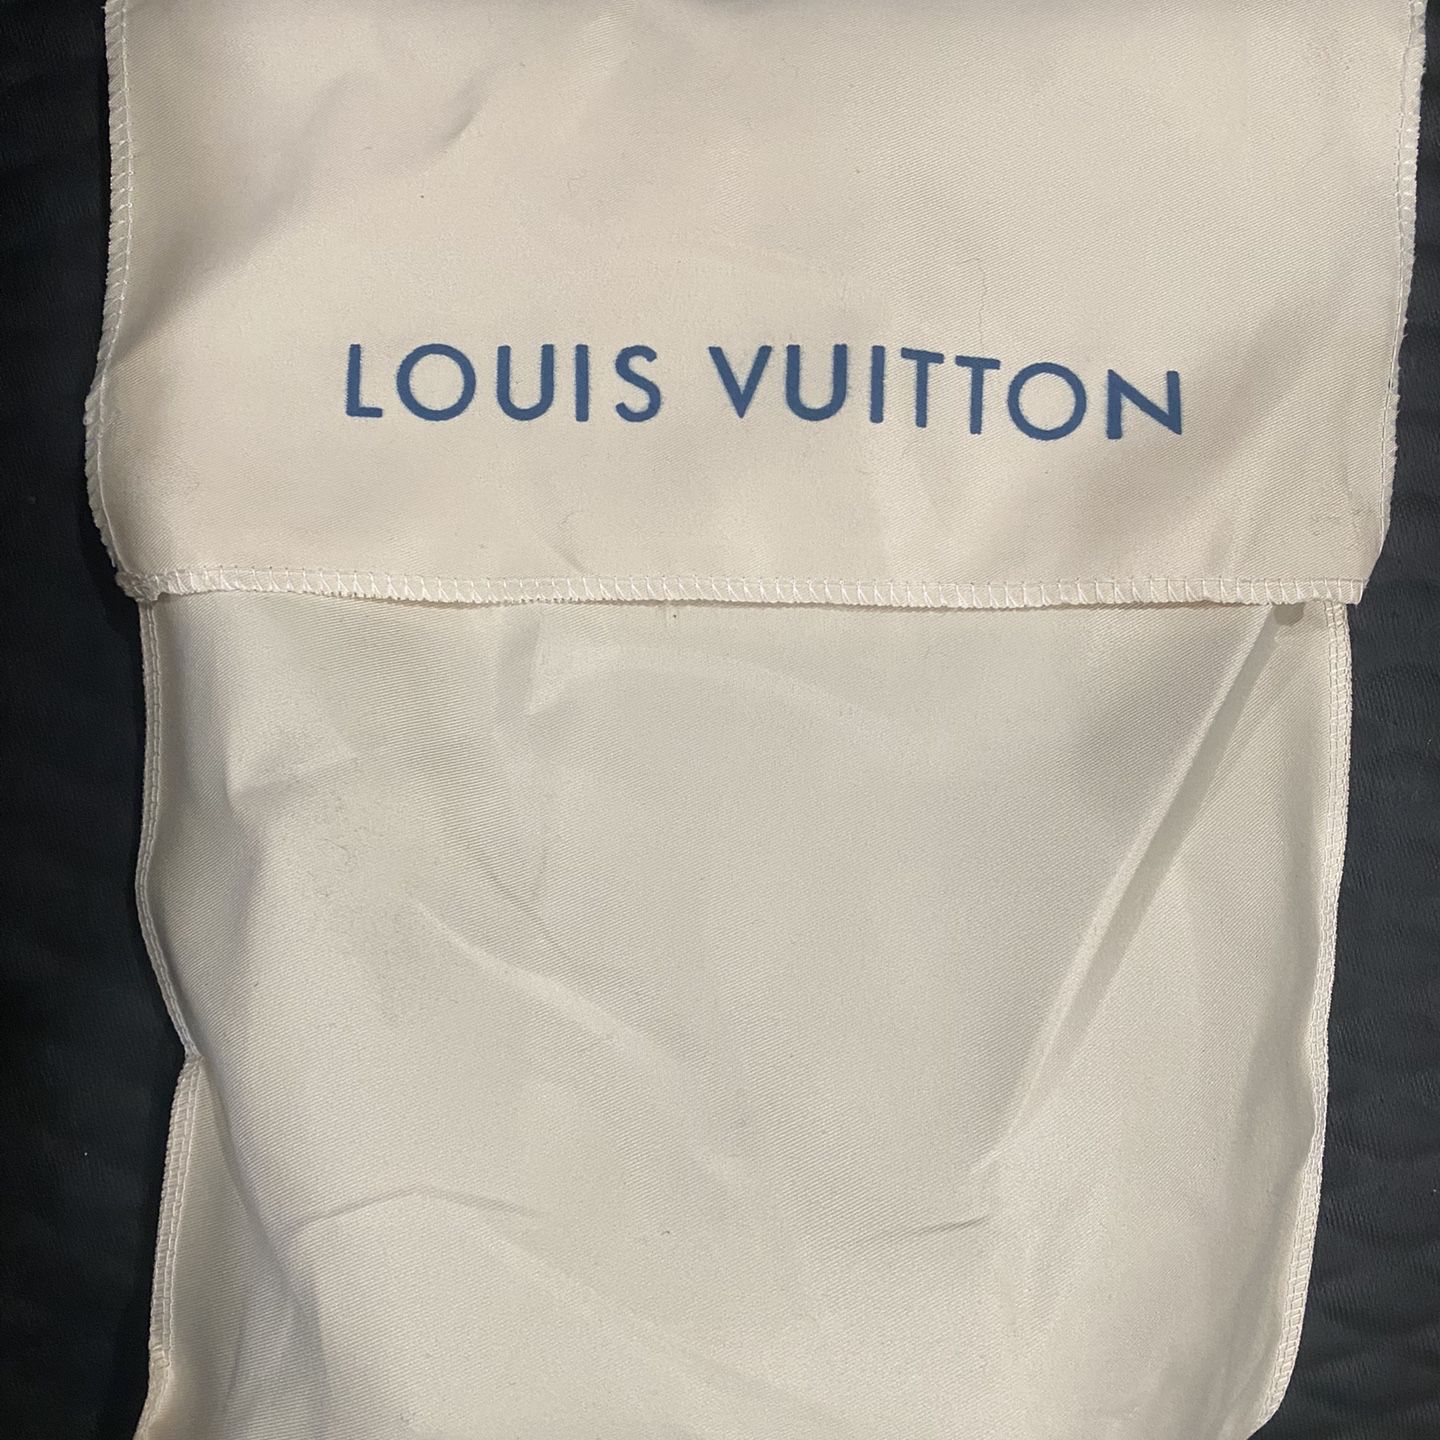 Vintage Louis Vuitton Bag for Sale in The Bronx, NY - OfferUp